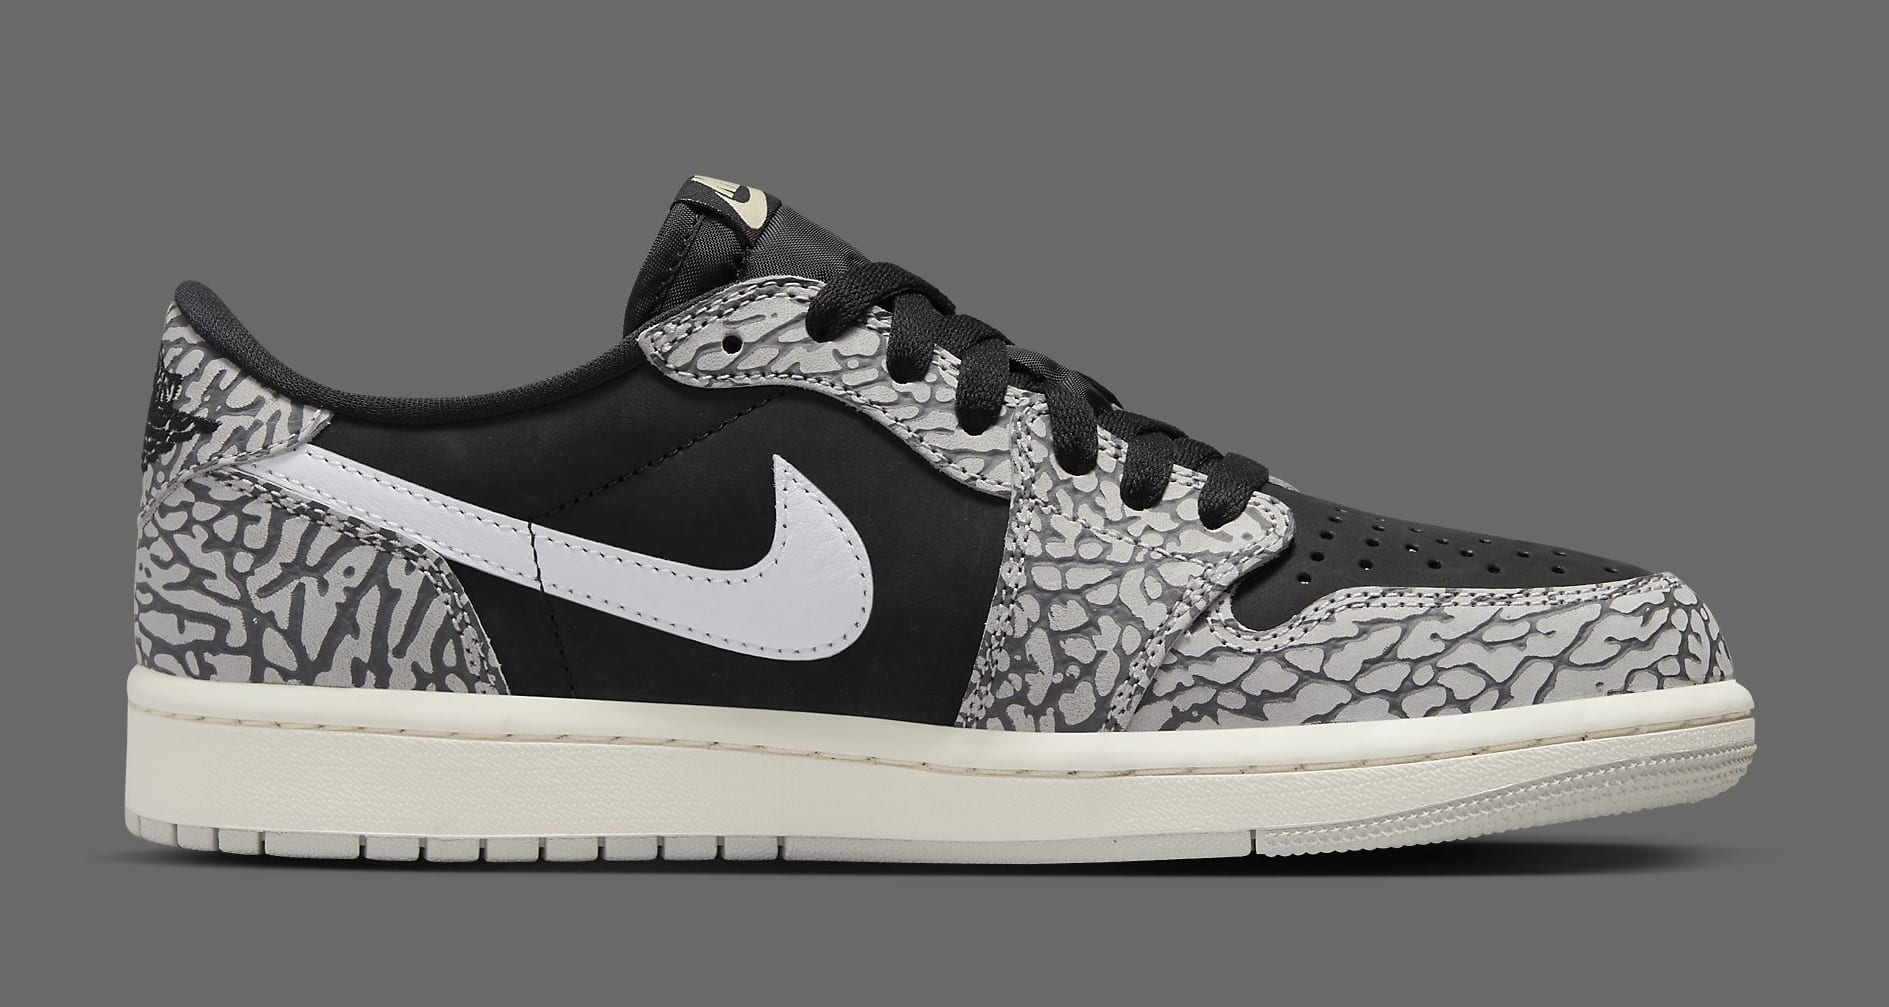 Closer Look at the 'Cement' Air Jordan 1 Low Inspired by the 'Black